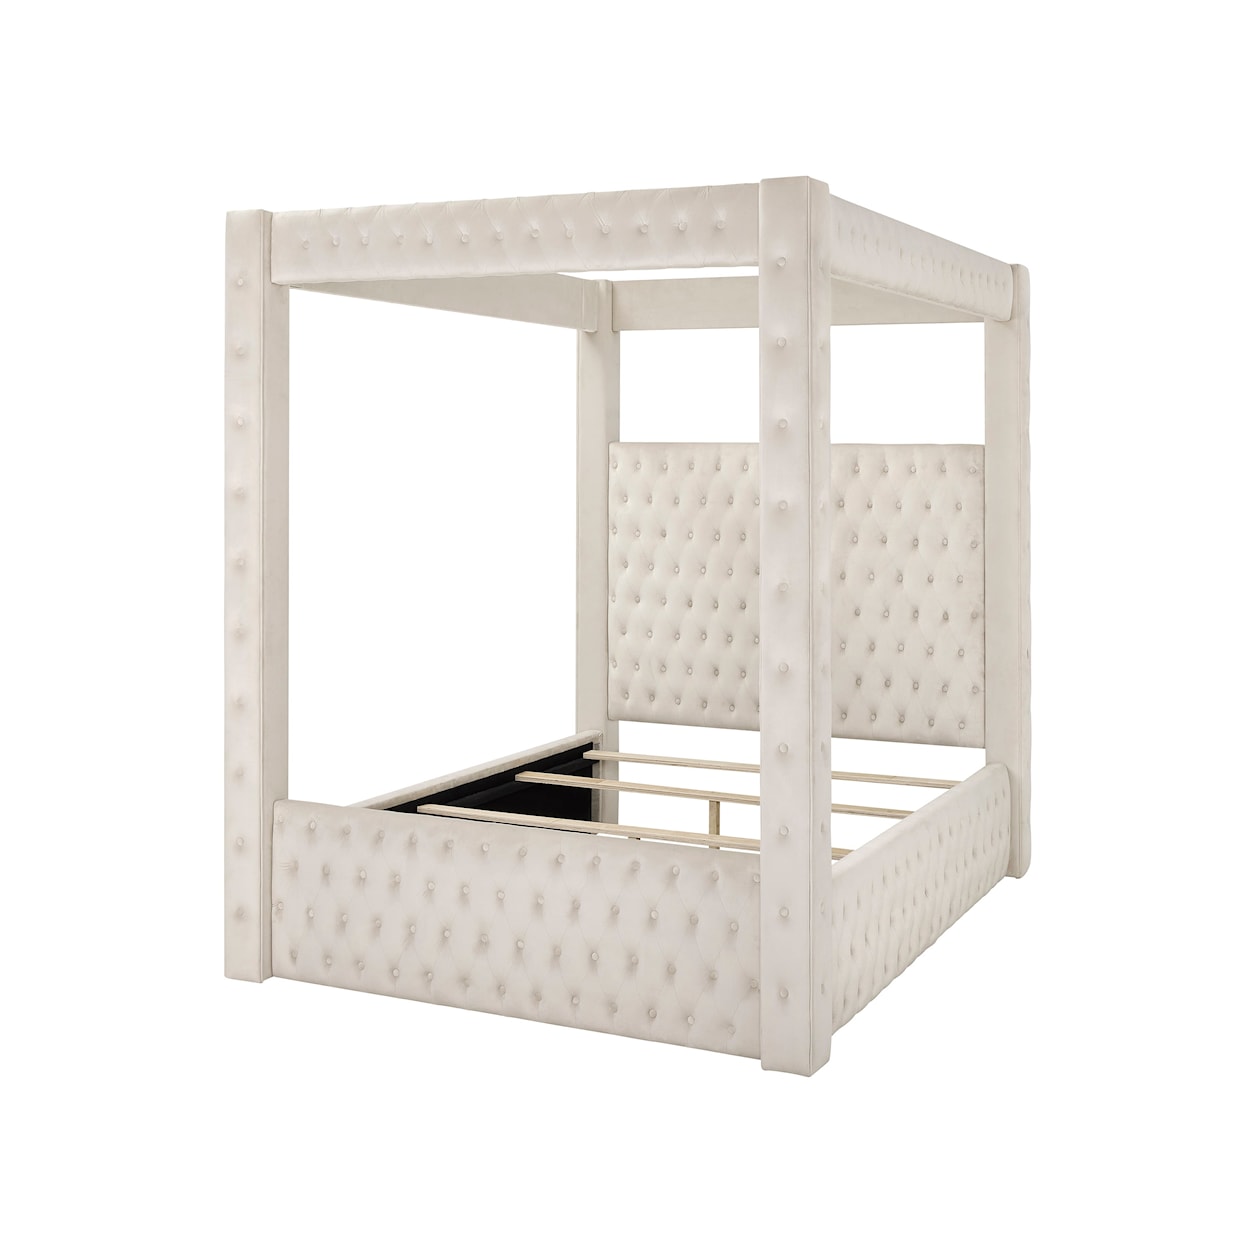 Crown Mark ANNABELLE King Canopy Bed - Ivory